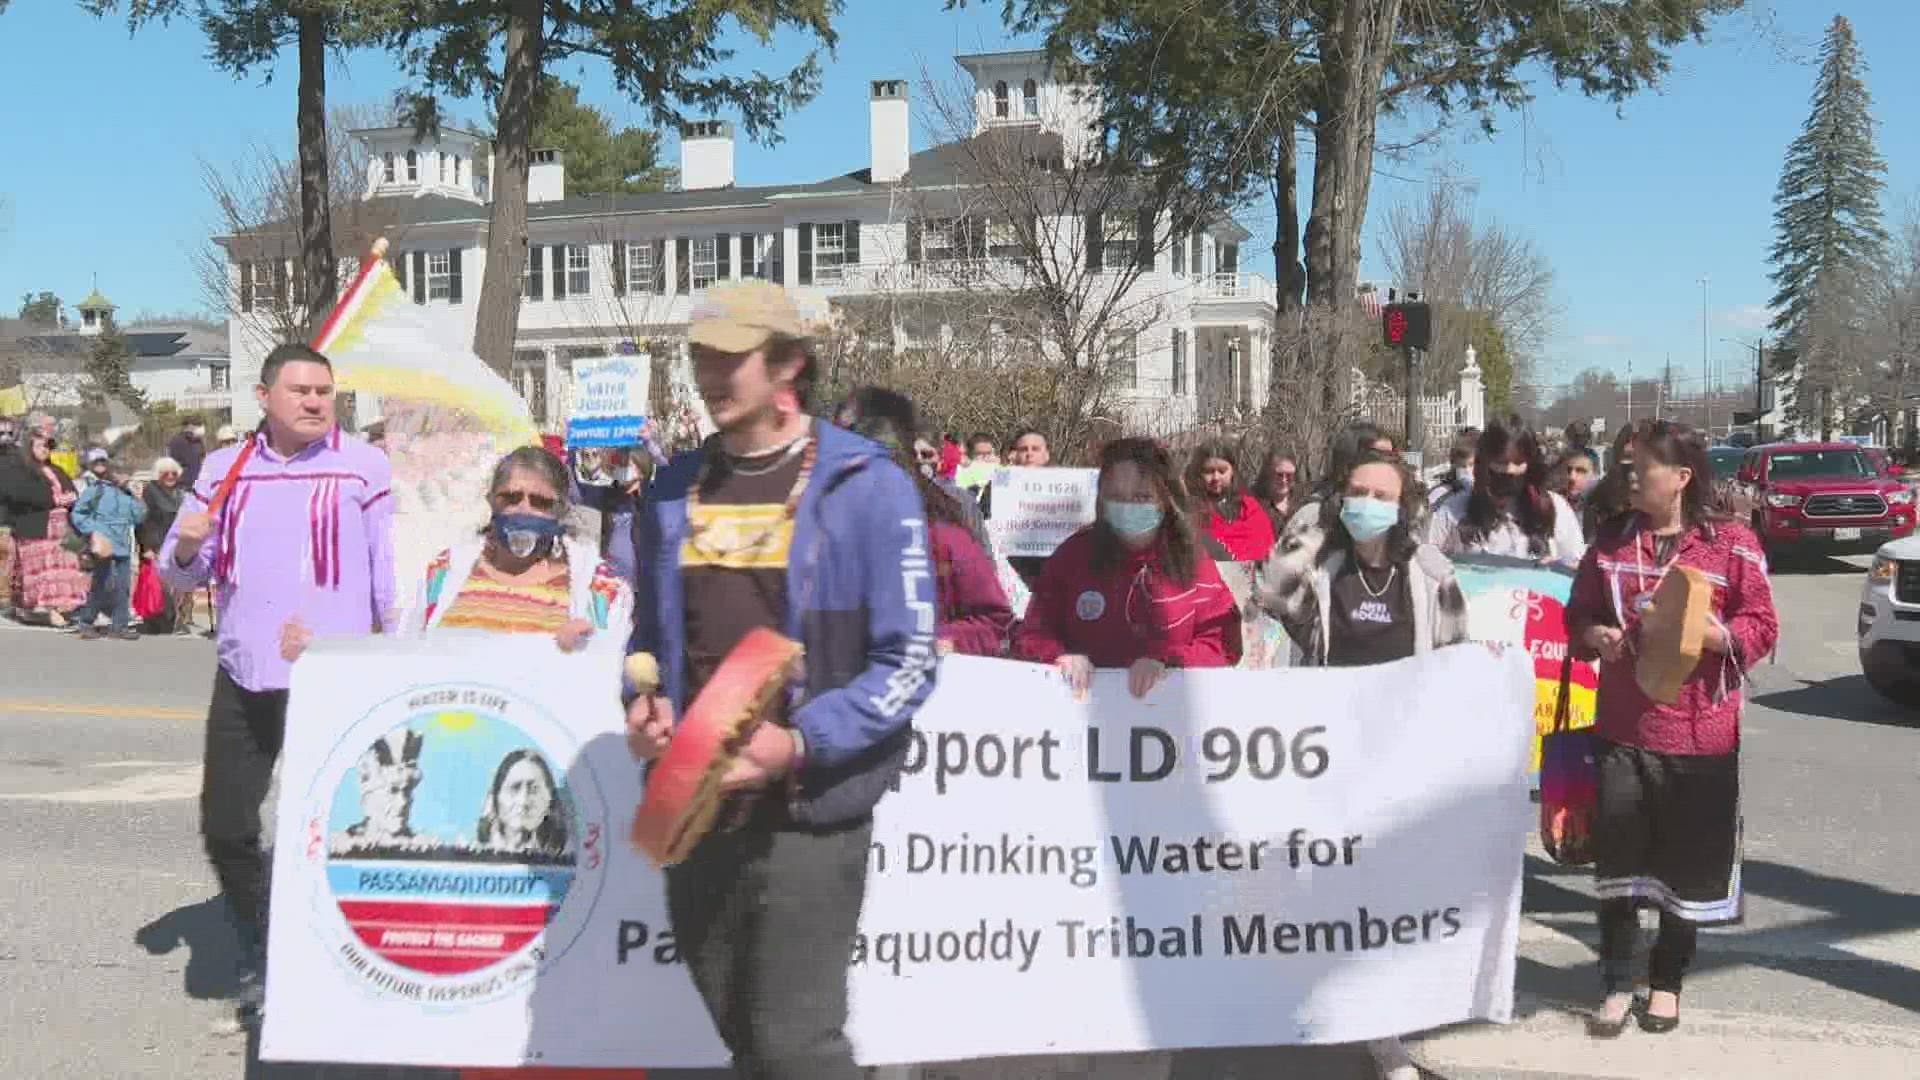 A bill in the legislature aims to give Passamaquoddy people at Pleasant Point jurisdiction over their drinking water, which they say has been contaminated for years.